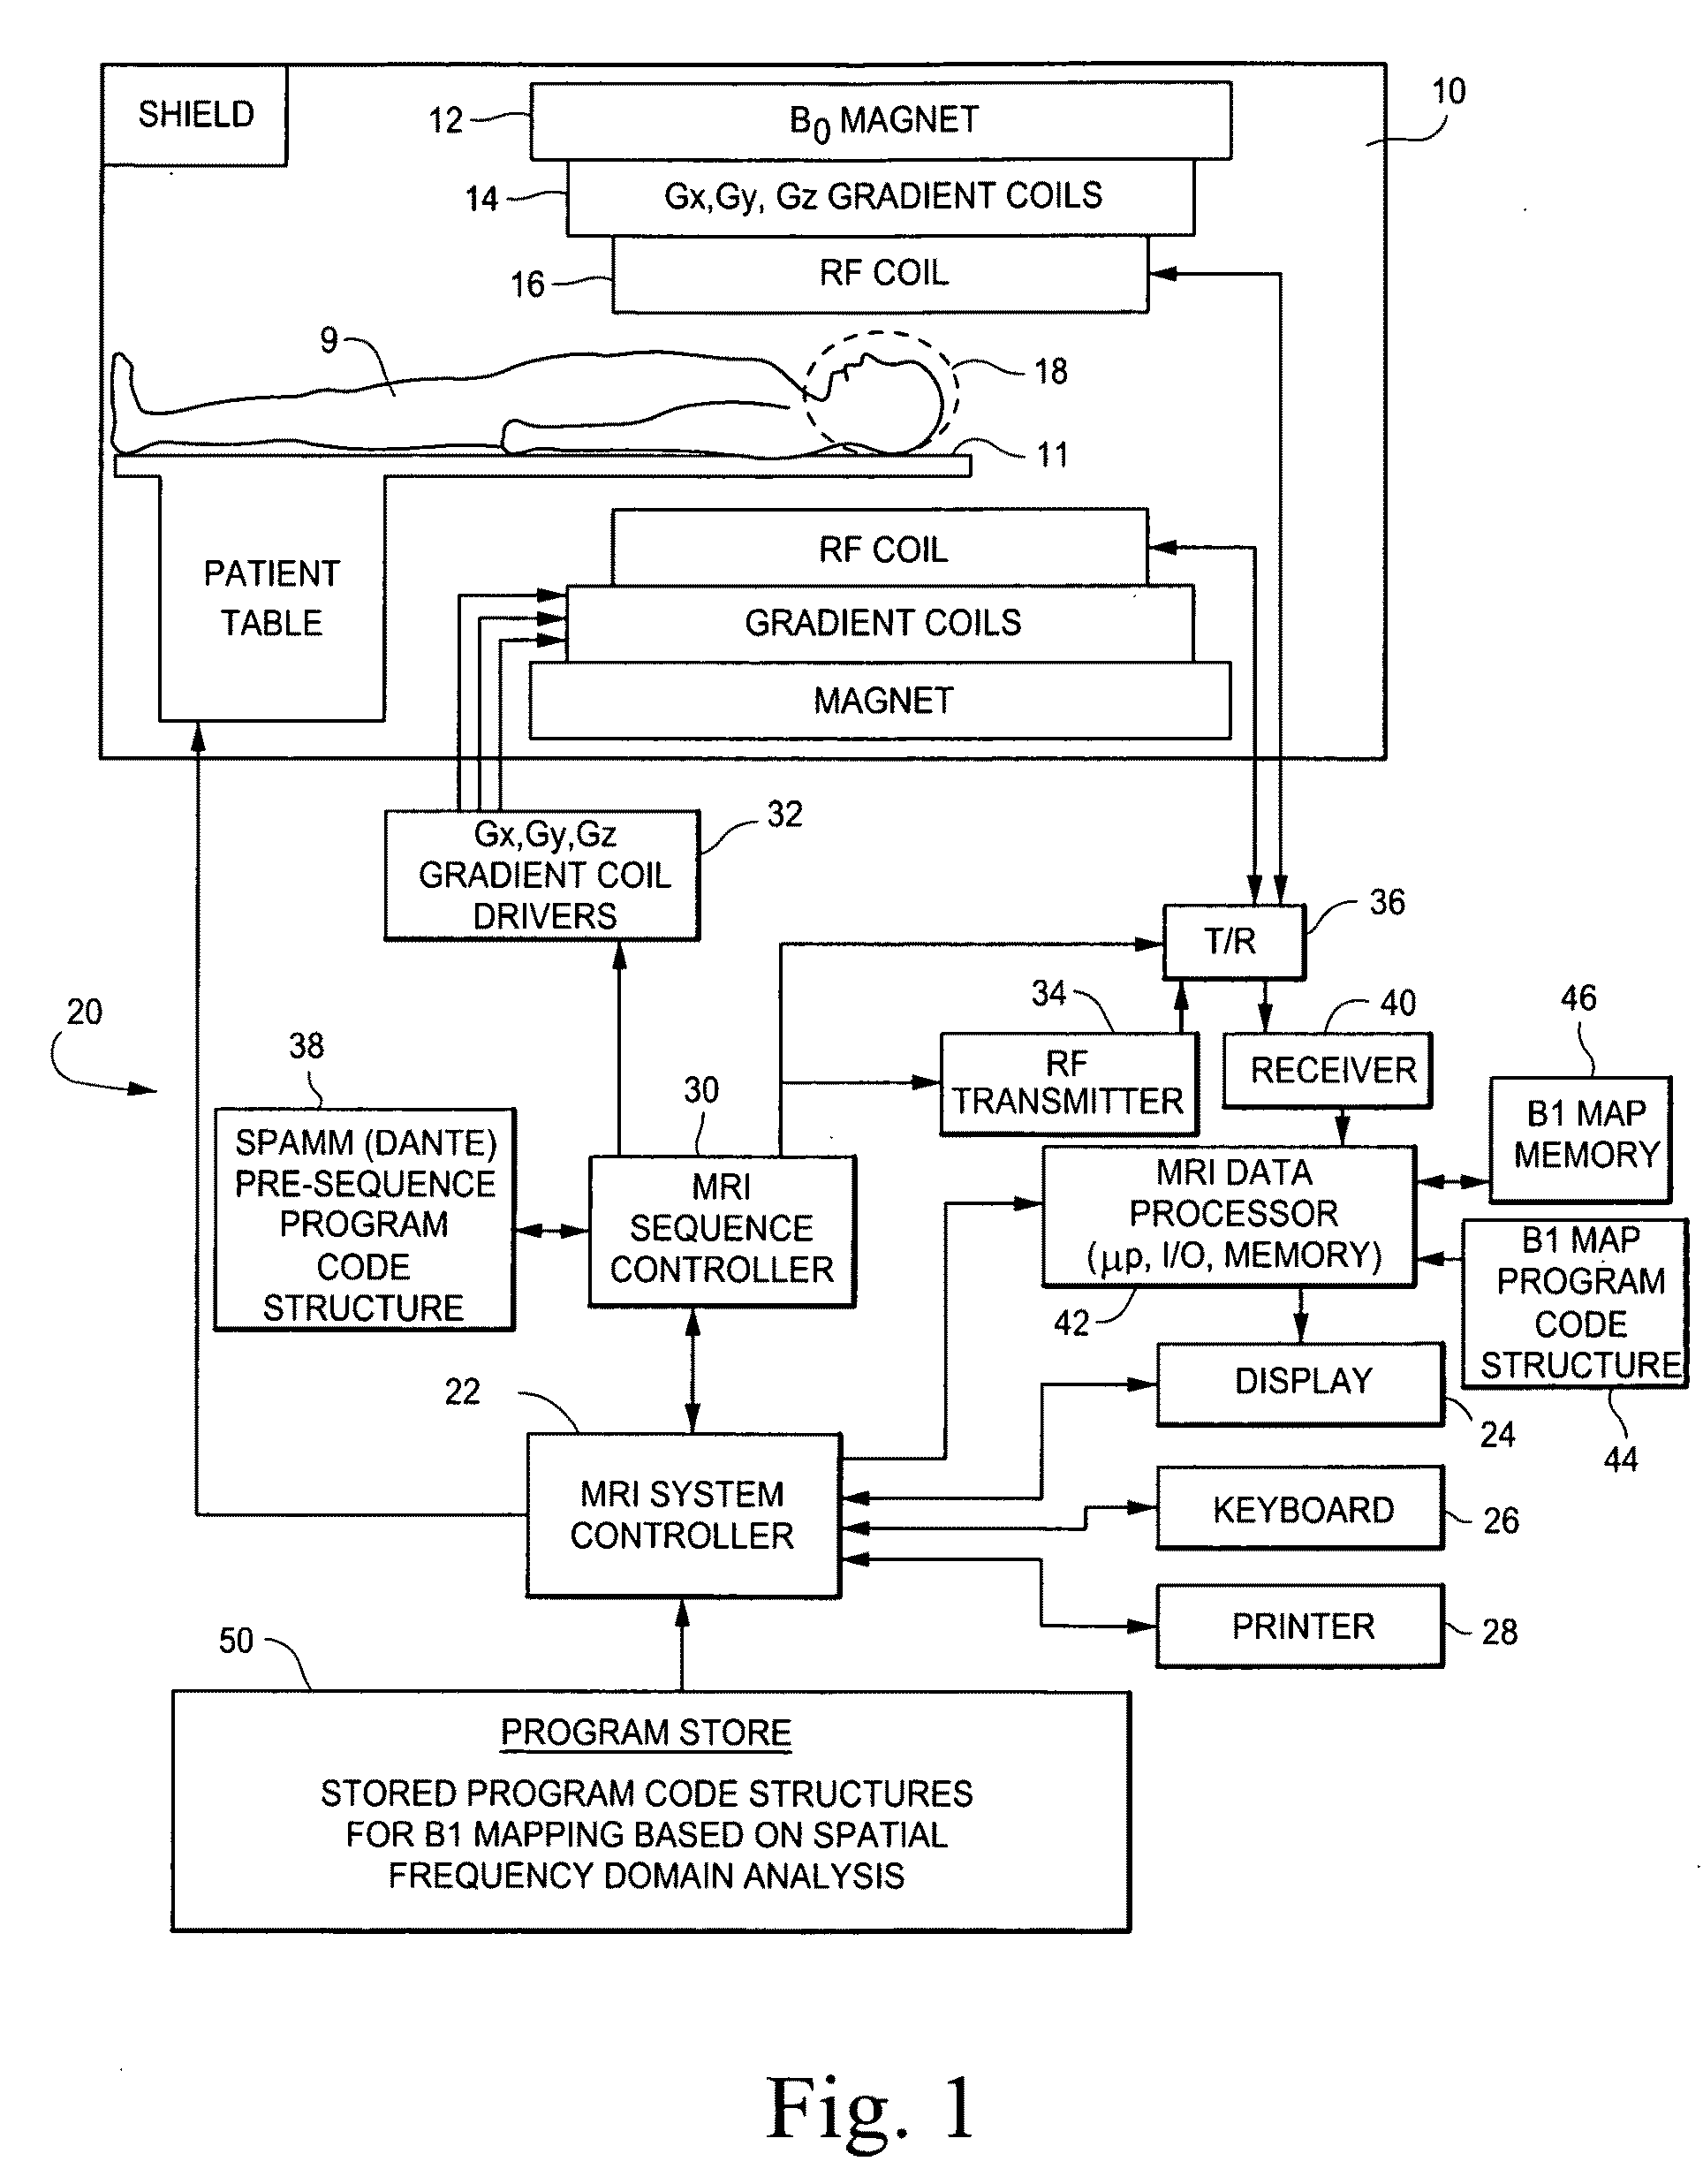 B1 mapping in MRI system using k-space spatial frequency domain filtering